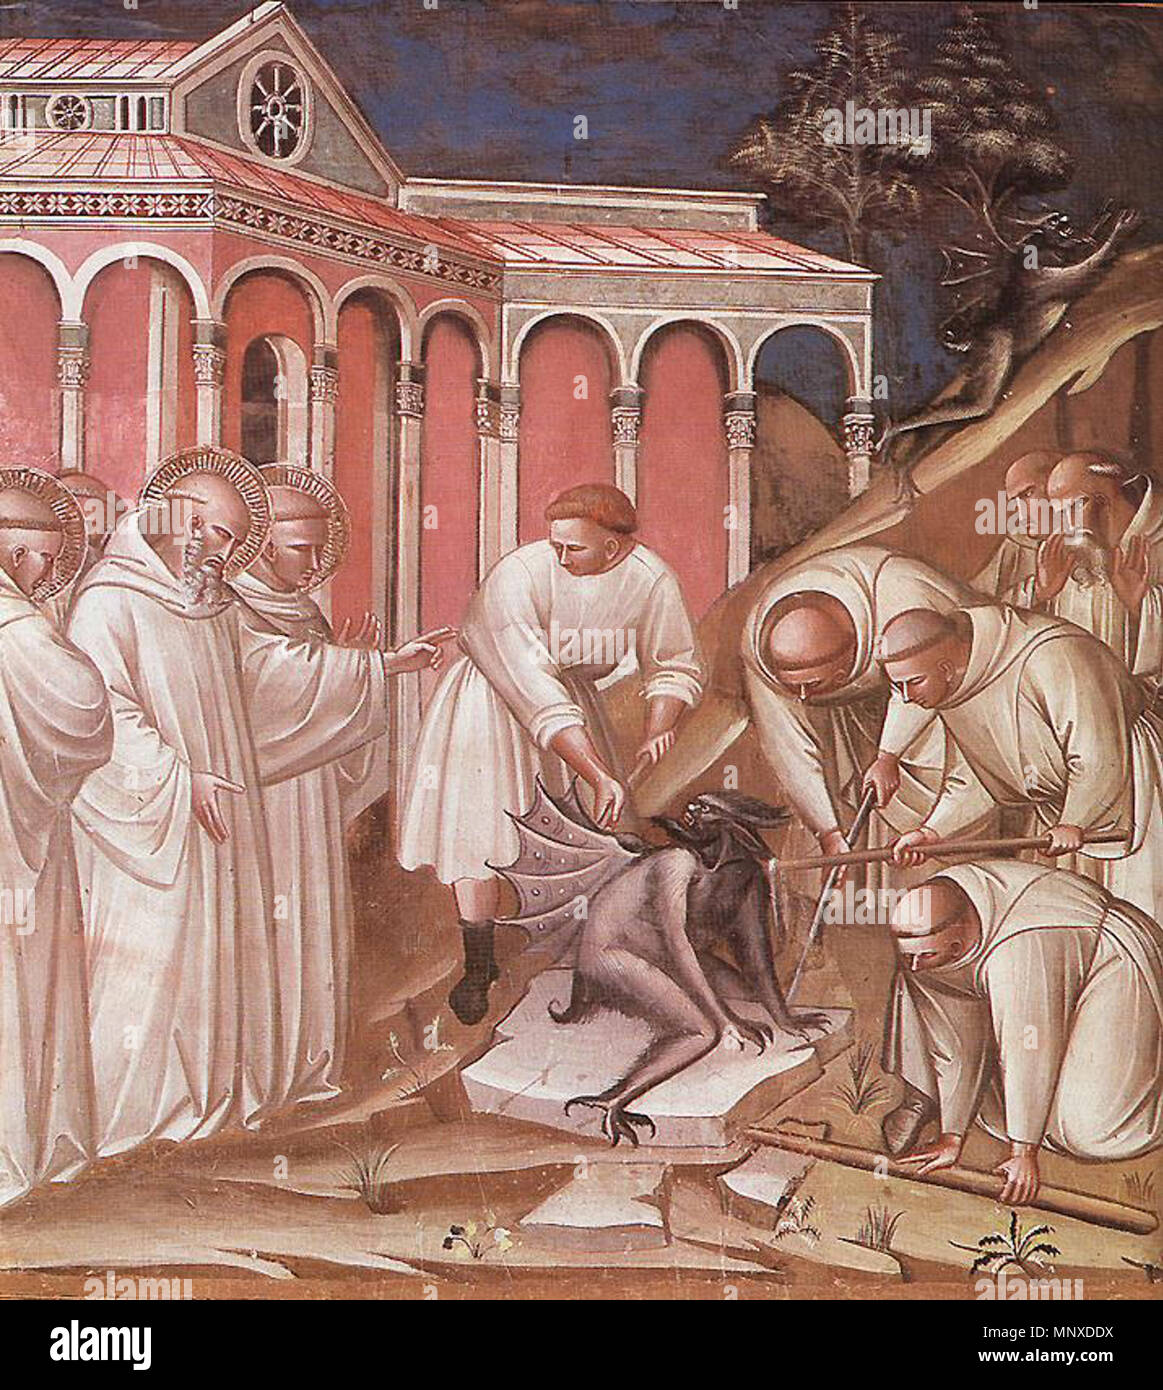 Stories from the Legend of St Benedict   1387.   1135 Spinello Aretino - Stories from the Legend of St Benedict - WGA21677 Stock Photo